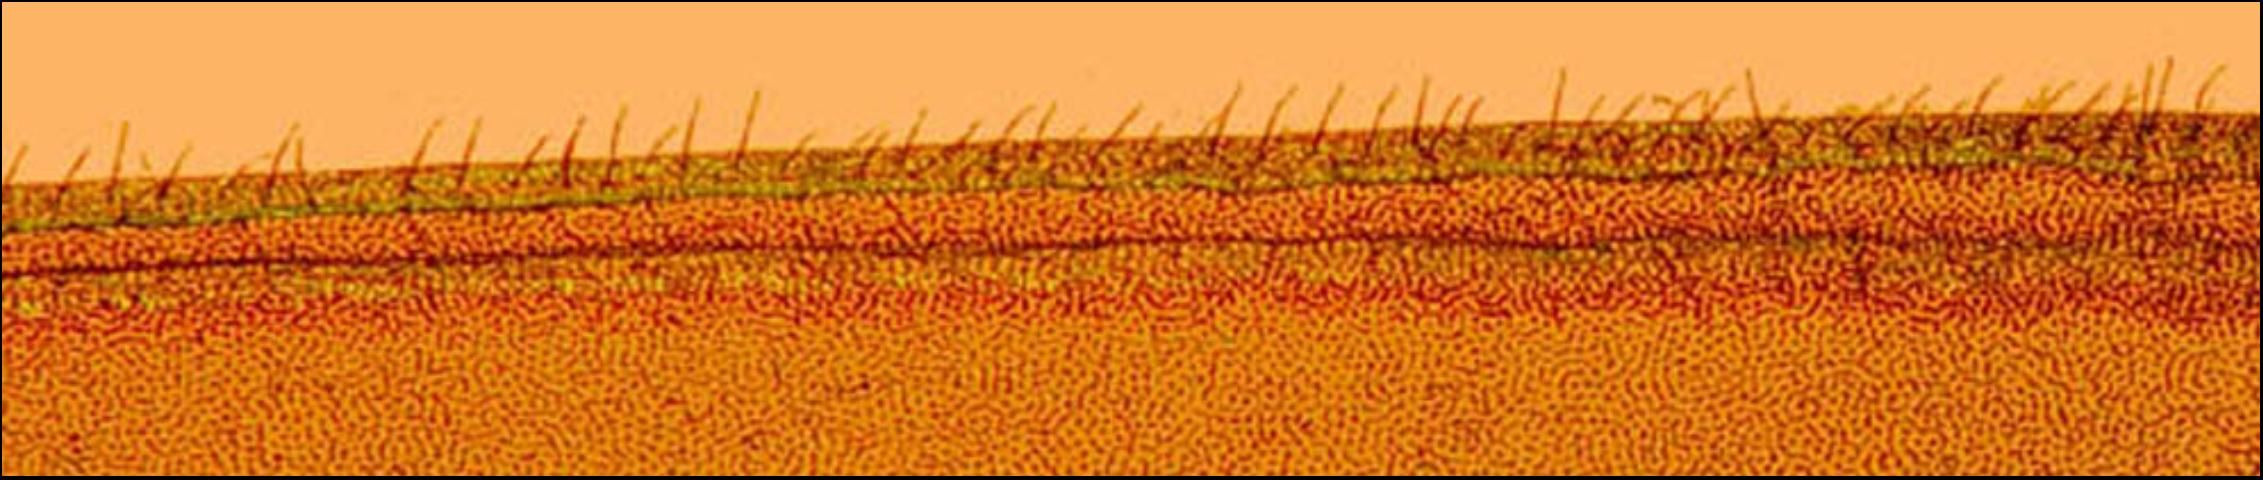 Figure 7. Close-up of Heterotermes subterranean termite wing margin showing microscopic hairs.